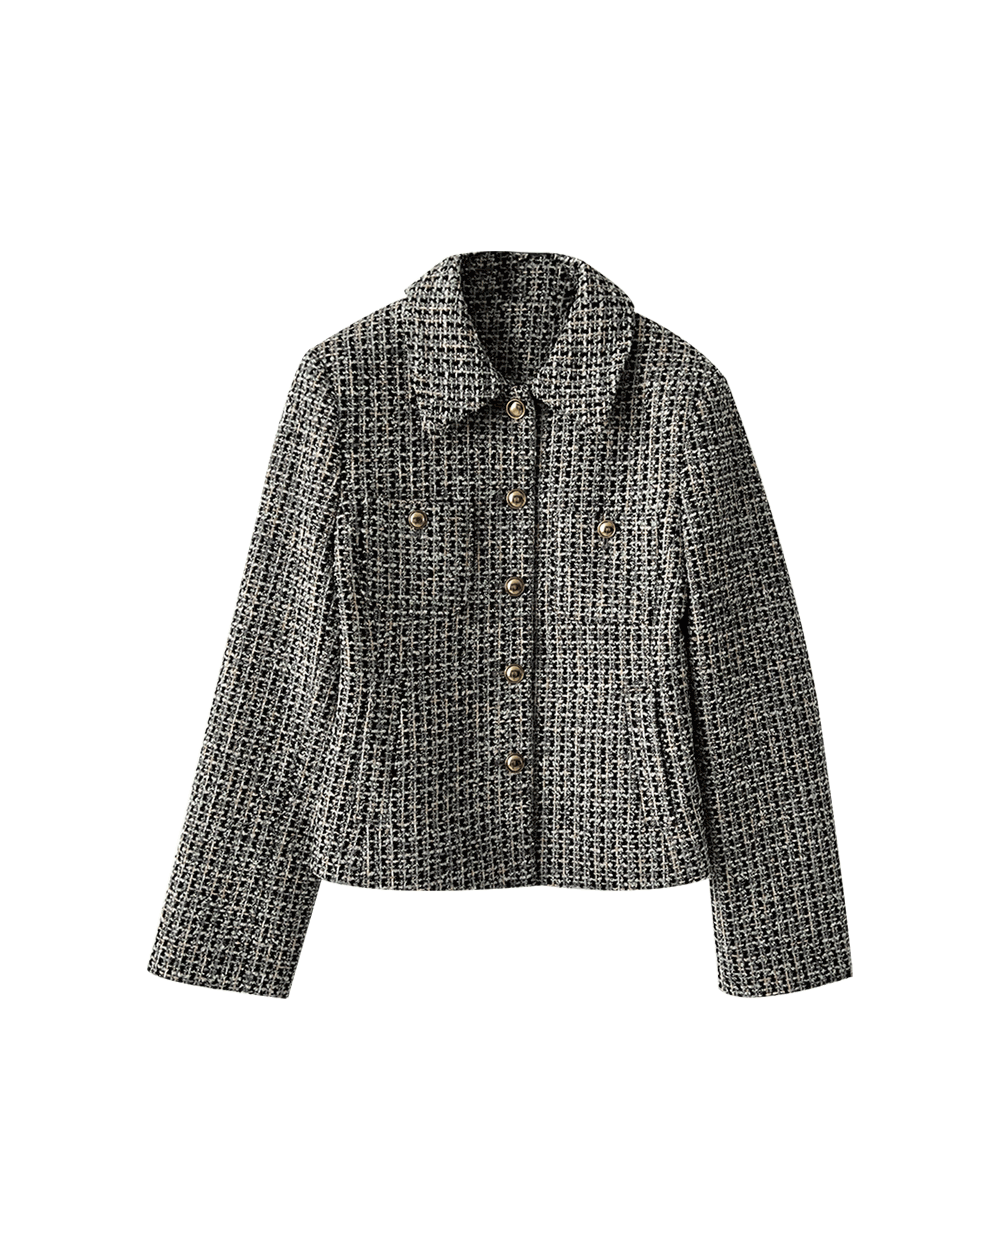 23fw gold button tweed jacket